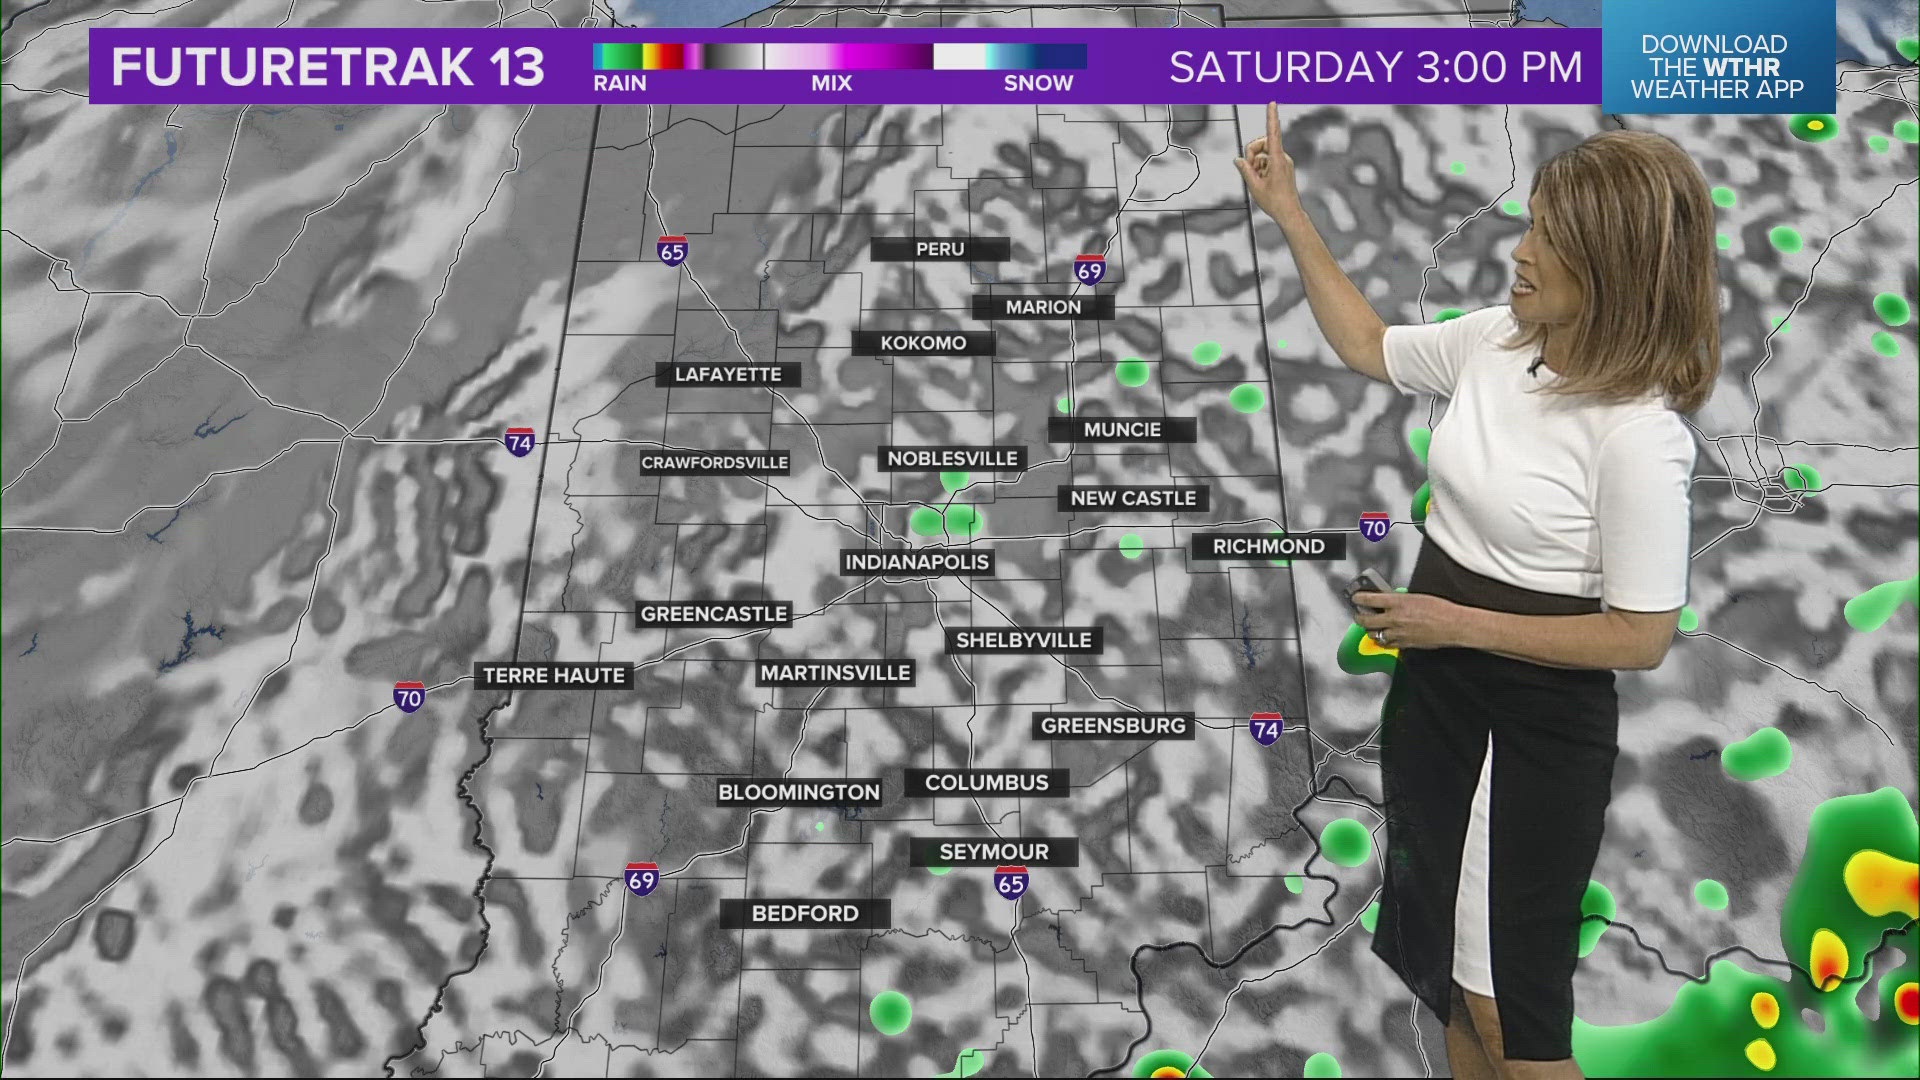 13News meteorologist Angela Buchman recaps a muggy Friday and previews the weekend weather in central Indiana ahead of the 500 Festival Mini Marathon.